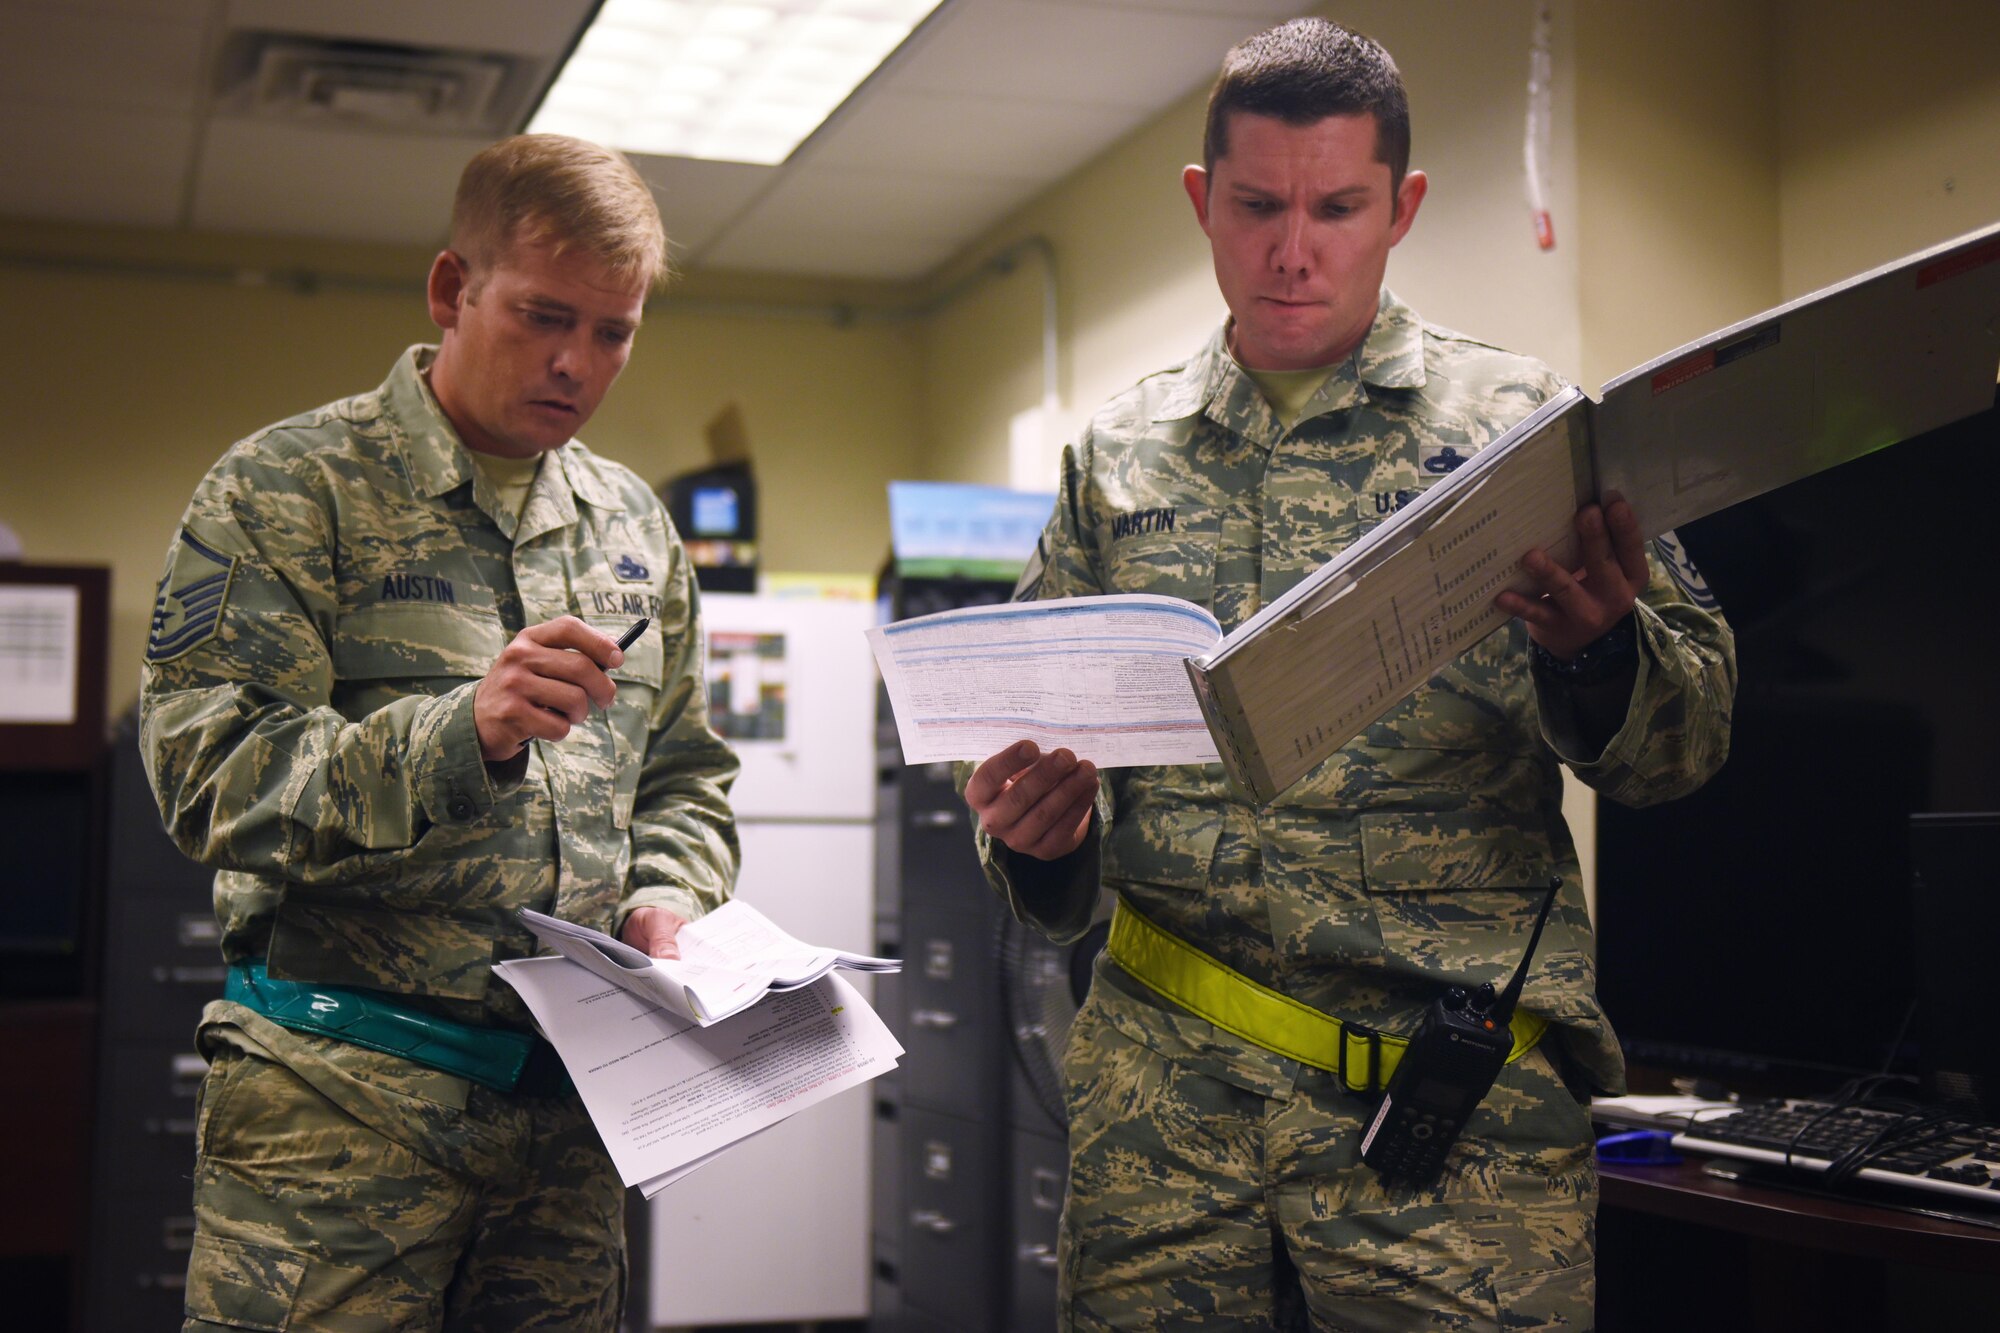 U.S. Air Force Master Sgts. Gabriel Austin, 27th Special Operations Aircraft Maintenance Squadron CV-22 production superintendent, and Christian Martin, 27th Special Operations Maintenance Squadron production superintendent, coordinate a full night’s to-do list November 16, 2016 at Cannon Air Force Base, N.M. Production superintendents task out the night’s repairs and bridge between the multiple shops working through the night to get the job done. (U.S. Air Force Photo by Senior Airman Shelby Kay-Fantozzi/released)